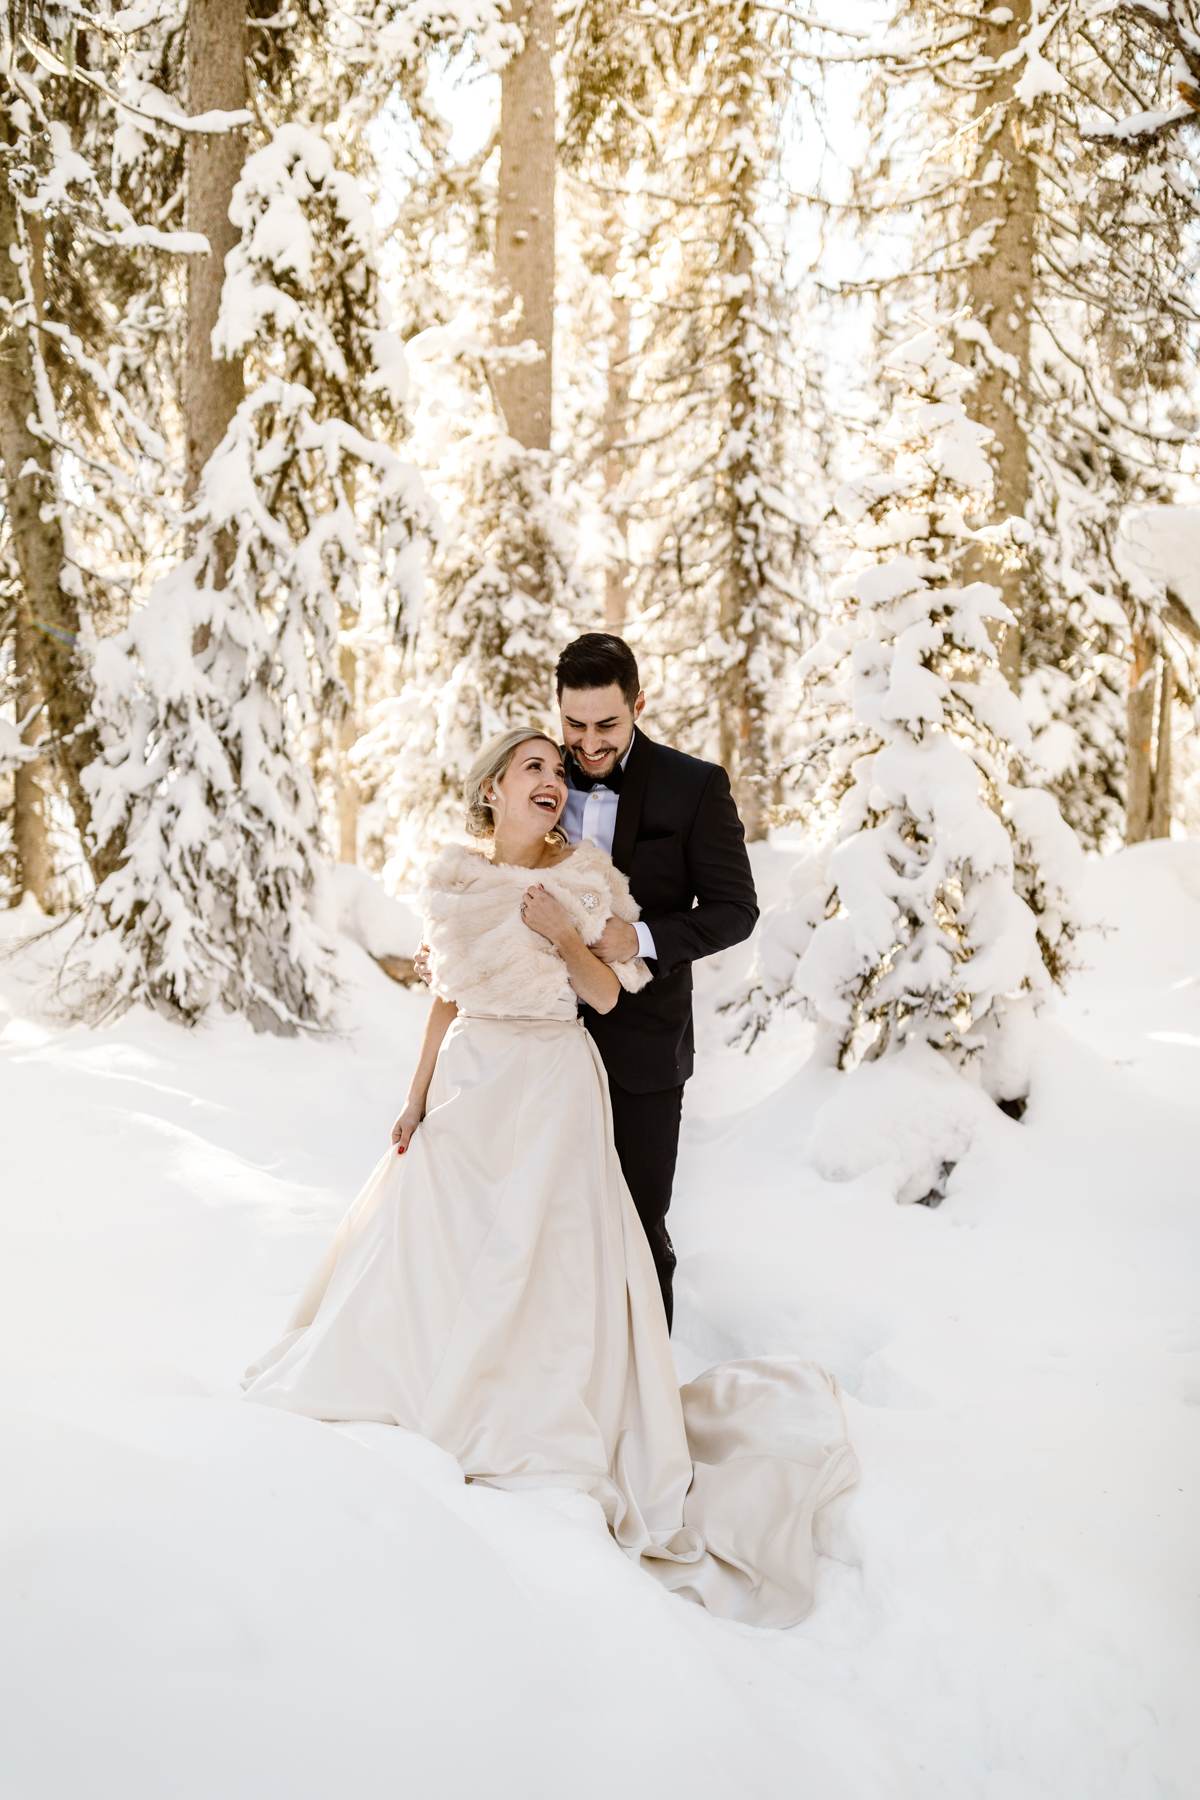 Fairmont Chateau Lake Louise Wedding Photography in Winter - Image 19